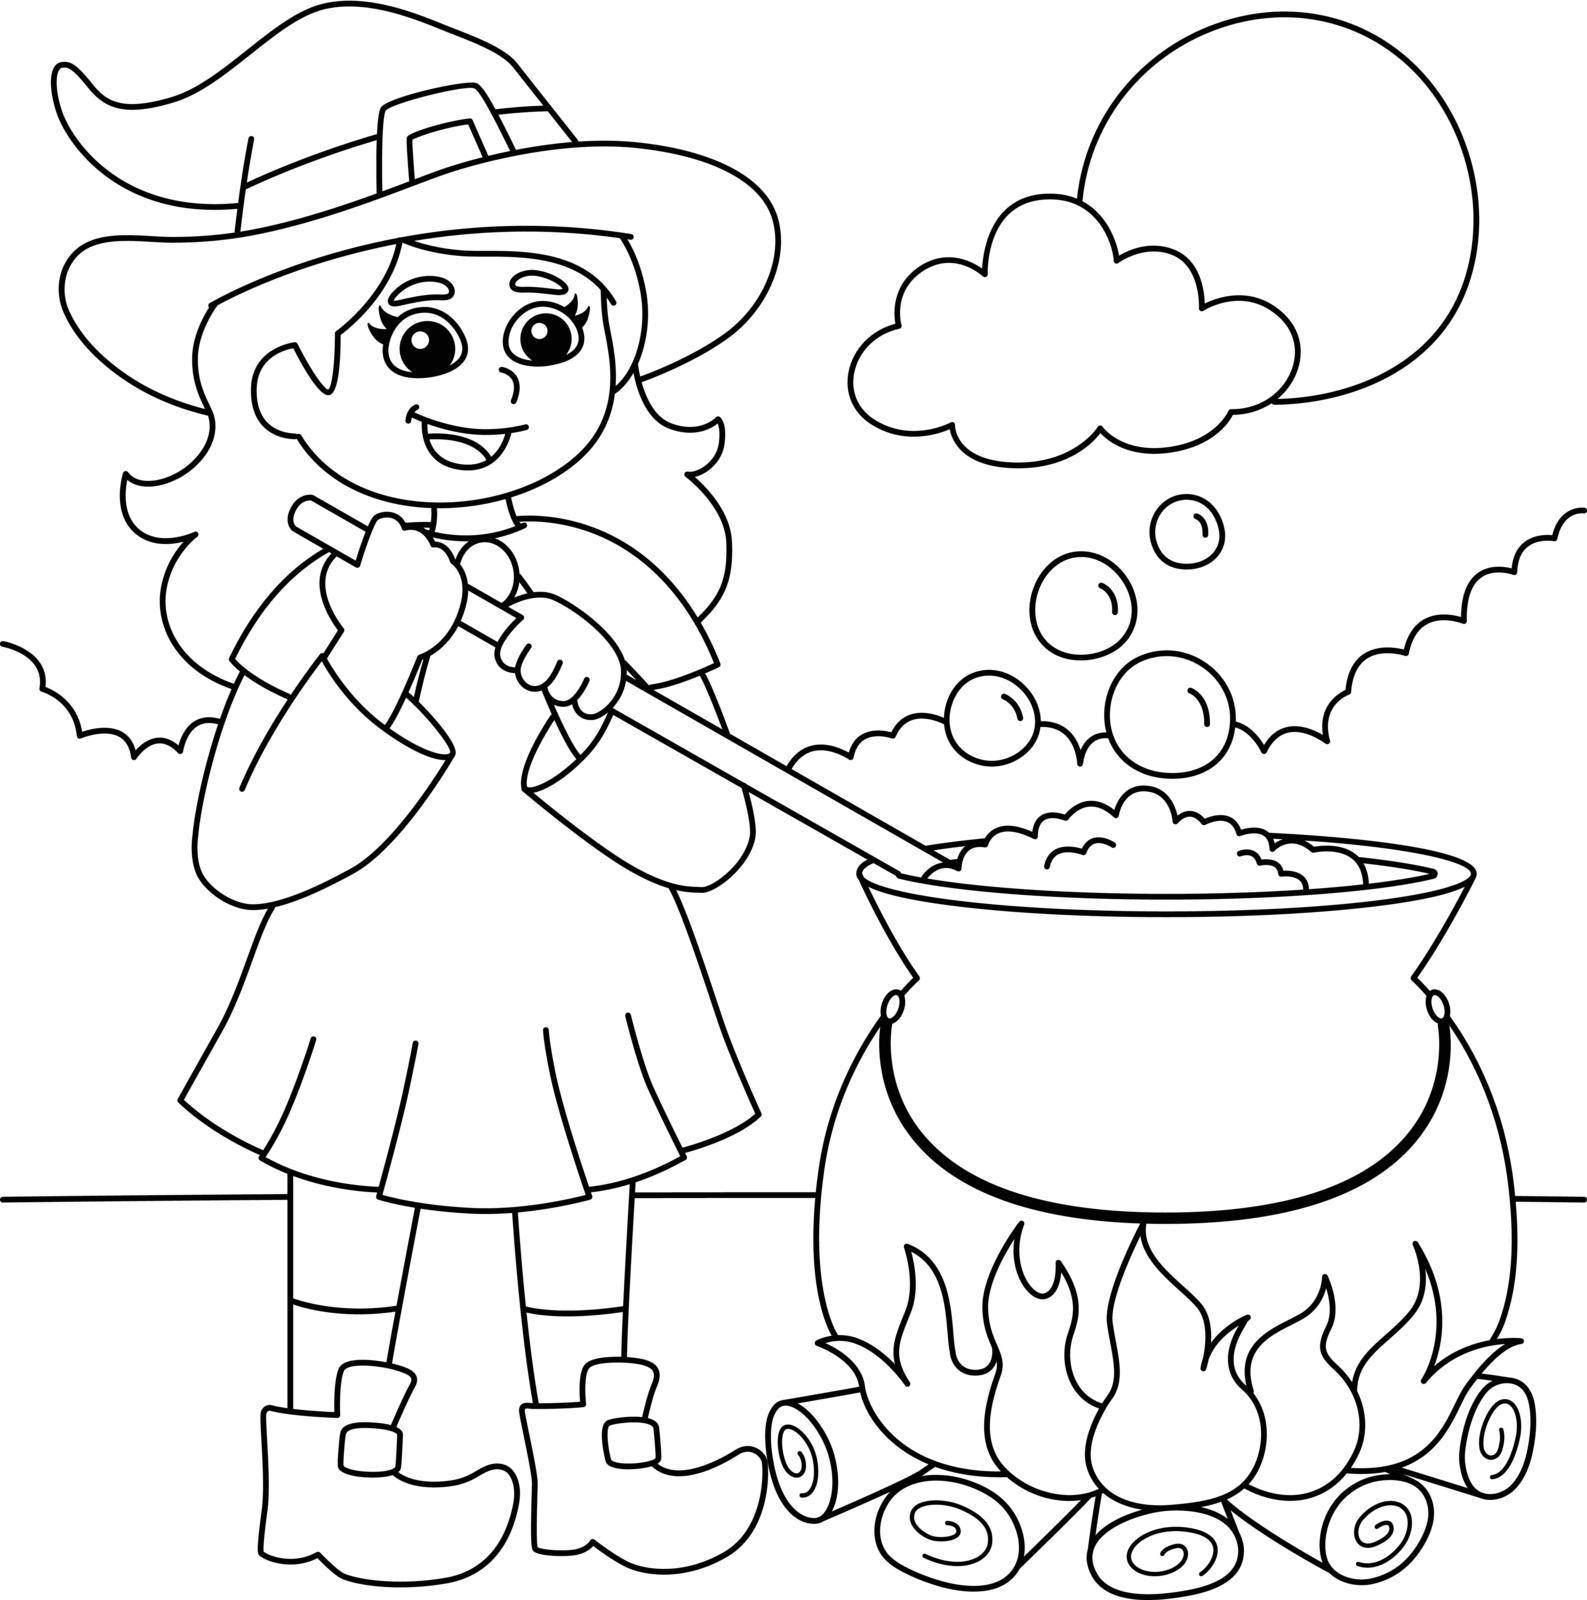 Witch Potion Pot Halloween Coloring Page for Kids by abbydesign